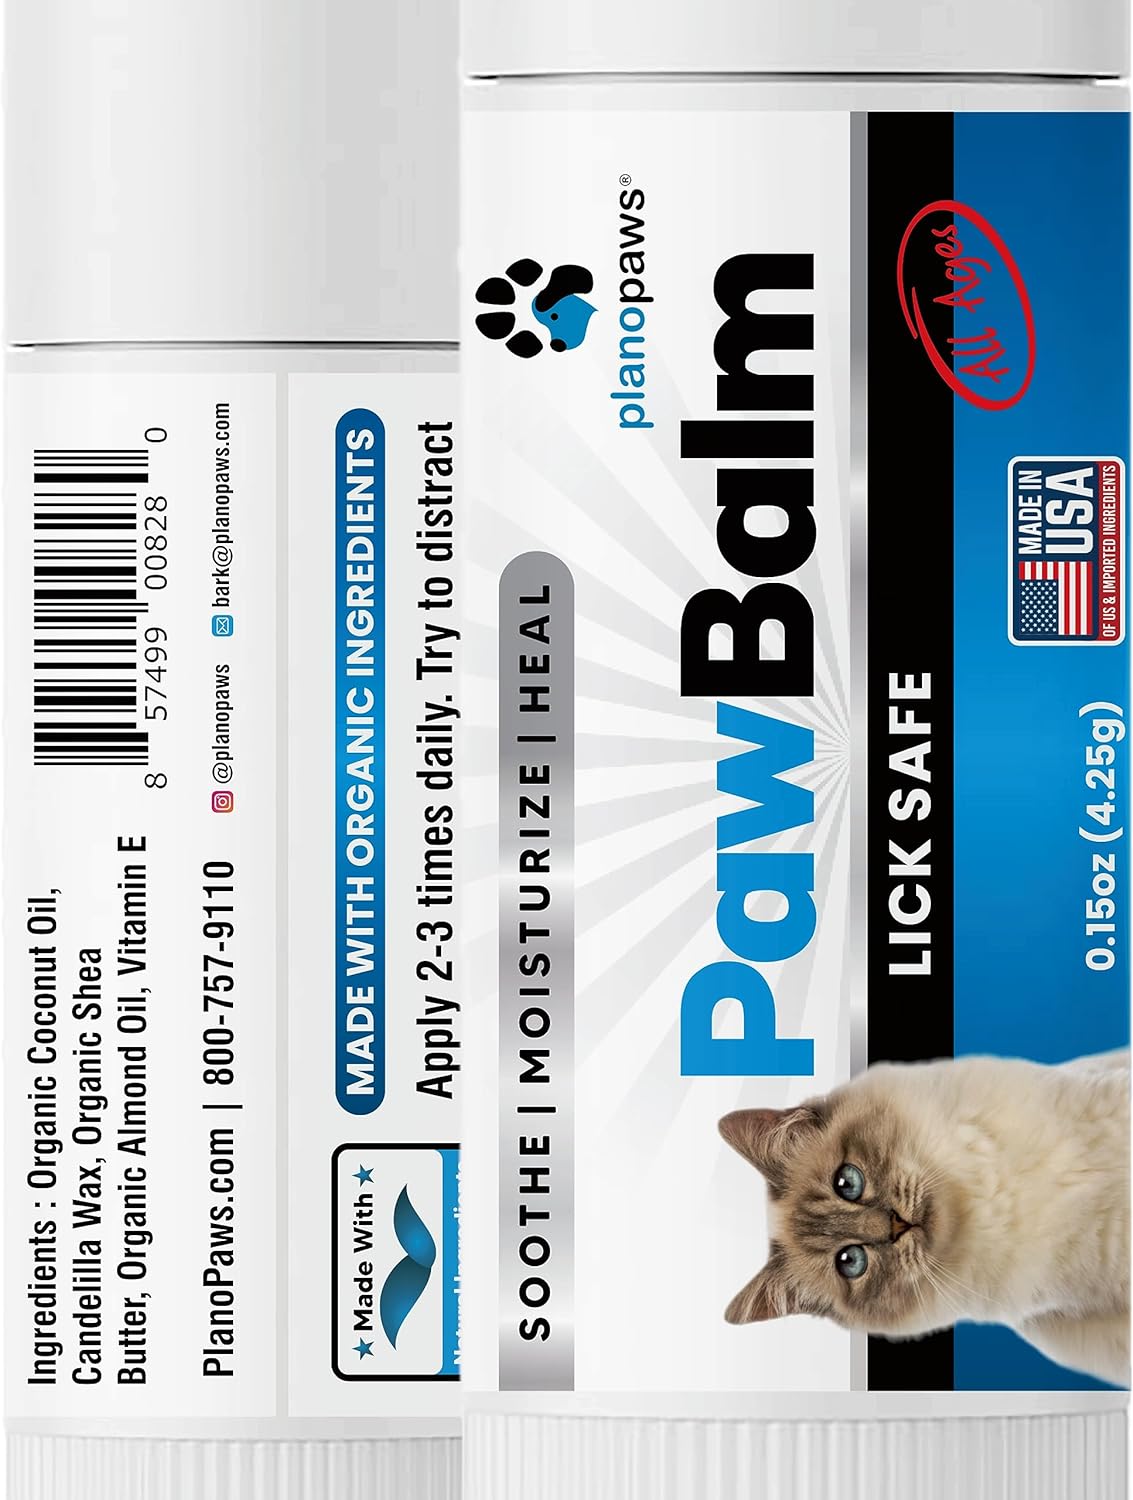 Lick Safe Cat Paw Balm - 0.15 Oz Paw Balm for Cats - Natural Paw Butter for Cats - Vet Recommended Cat Paw Protection - Paw Wax for Cats - Fix Dry Cracked Paws - Cat Paw Moisturizer Stick - Cat Stuff